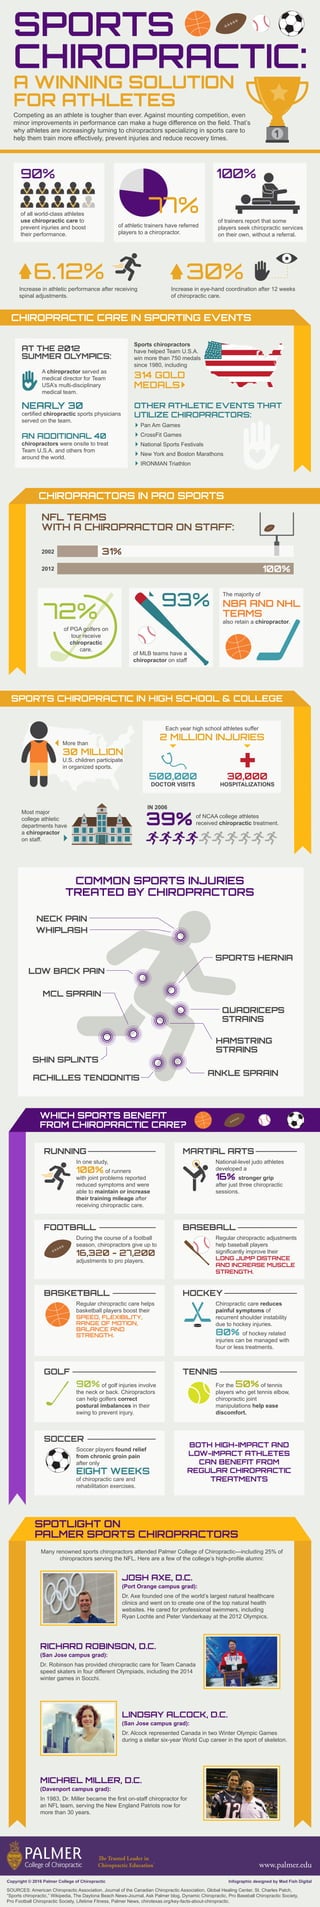 SPORTS
CHIROPRACTIC:
Competing as an athlete is tougher than ever. Against mounting competition, even
minor improvements in performance can make a huge difference on the field. That’s
why athletes are increasingly turning to chiropractors specializing in sports care to
help them train more effectively, prevent injuries and reduce recovery times.
of all world-class athletes
use chiropractic care to
prevent injuries and boost
their performance.
90%
A WINNING SOLUTION
FOR ATHLETES
CHIROPRACTIC CARE IN SPORTING EVENTS
1
OTHER ATHLETIC EVENTS THAT
UTILIZE CHIROPRACTORS:
Pan Am Games
CrossFit Games
National Sports Festivals
New York and Boston Marathons
IRONMAN Triathlon
AT THE 2012
SUMMER OLYMPICS:
NEARLY 30
certified chiropractic sports physicians
served on the team.
AN ADDITIONAL 40
chiropractors were onsite to treat
Team U.S.A. and others from
around the world.
Sports chiropractors
have helped Team U.S.A.
win more than 750 medals
since 1980, including
314 GOLD
MEDALS
CHIROPRACTORS IN PRO SPORTS
NFL TEAMS
WITH A CHIROPRACTOR ON STAFF:
SPORTS CHIROPRACTIC IN HIGH SCHOOL & COLLEGE
IN 2006
A chiropractor served as
medical director for Team
USA’s multi-disciplinary
medical team.
2002
2012
31%
100%
of PGA golfers on
tour receive
chiropractic
care.
72%
of athletic trainers have referred
players to a chiropractor.
77% of trainers report that some
players seek chiropractic services
on their own, without a referral.
100%
Increase in athletic performance after receiving
spinal adjustments.
Increase in eye-hand coordination after 12 weeks
of chiropractic care.
6.12% 30%
93%
The majority of
NBA AND NHL
TEAMS
also retain a chiropractor.
of MLB teams have a
chiropractor on staff
More than
30 MILLION
U.S. children participate
in organized sports.
Each year high school athletes suffer
2 MILLION INJURIES
500,000
DOCTOR VISITS
30,000
HOSPITALIZATIONS
Most major
college athletic
departments have
a chiropractor
on staff.
of NCAA college athletes
received chiropractic treatment.39%
COMMON SPORTS INJURIES
TREATED BY CHIROPRACTORS
MCL SPRAIN
NECK PAIN
WHIPLASH
LOW BACK PAIN
HAMSTRING
STRAINS
SPORTS HERNIA
ANKLE SPRAIN
QUADRICEPS
STRAINS
ACHILLES TENDONITIS
SHIN SPLINTS
WHICH SPORTS BENEFIT
FROM CHIROPRACTIC CARE?
Many renowned sports chiropractors attended Palmer College of Chiropractic—including 25% of
chiropractors serving the NFL. Here are a few of the college’s high-profile alumni:
MICHAEL MILLER, D.C.
(Davenport campus grad):
In 1983, Dr. Miller became the first on-staff chiropractor for
an NFL team, serving the New England Patriots now for
more than 30 years.
SPOTLIGHT ON
PALMER SPORTS CHIROPRACTORS
JOSH AXE, D.C.
(Port Orange campus grad):
Dr. Axe founded one of the world’s largest natural healthcare
clinics and went on to create one of the top natural health
websites. He cared for professional swimmers, including
Ryan Lochte and Peter Vanderkaay at the 2012 Olympics.
RICHARD ROBINSON, D.C.
(San Jose campus grad):
Dr. Robinson has provided chiropractic care for Team Canada
speed skaters in four different Olympiads, including the 2014
winter games in Socchi.
LINDSAY ALCOCK, D.C.
(San Jose campus grad):
Dr. Alcock represented Canada in two Winter Olympic Games
during a stellar six-year World Cup career in the sport of skeleton.
www.palmer.edu
Infographic designed by Mad Fish DigitalCopyright © 2016 Palmer College of Chiropractic
The Trusted Leader in
Chiropractic Education®
SOURCES: American Chiropractic Association, Journal of the Canadian Chiropractic Association, Global Healing Center, St. Charles Patch,
“Sports chiropractic,” Wikipedia, The Daytona Beach News-Journal, Ask Palmer blog, Dynamic Chiropractic, Pro Baseball Chiropractic Society,
Pro Football Chiropractic Society, Lifetime Fitness, Palmer News, chirotexas.org/key-facts-about-chiropractic.
National-level judo athletes
developed a
16% stronger grip
after just three chiropractic
sessions.
In one study,
100% of runners
with joint problems reported
reduced symptoms and were
able to maintain or increase
their training mileage after
receiving chiropractic care.
BOTH HIGH-IMPACT AND
LOW-IMPACT ATHLETES
CAN BENEFIT FROM
REGULAR CHIROPRACTIC
TREATMENTS
RUNNING MARTIAL ARTS
Regular chiropractic adjustments
help baseball players
significantly improve their
LONG JUMP DISTANCE
AND INCREASE MUSCLE
STRENGTH.
During the course of a football
season, chiropractors give up to
16,320 - 27,200
adjustments to pro players.
FOOTBALL BASEBALL
Chiropractic care reduces
painful symptoms of
recurrent shoulder instability
due to hockey injuries.
80% of hockey related
injuries can be managed with
four or less treatments.
Regular chiropractic care helps
basketball players boost their
SPEED, FLEXIBILITY,
RANGE OF MOTION,
BALANCE AND
STRENGTH.
BASKETBALL HOCKEY
For the 50% of tennis
players who get tennis elbow,
chiropractic joint
manipulations help ease
discomfort.
90% of golf injuries involve
the neck or back. Chiropractors
can help golfers correct
postural imbalances in their
swing to prevent injury.
GOLF TENNIS
Soccer players found relief
from chronic groin pain
after only
EIGHT WEEKS
of chiropractic care and
rehabilitation exercises.
SOCCER
 